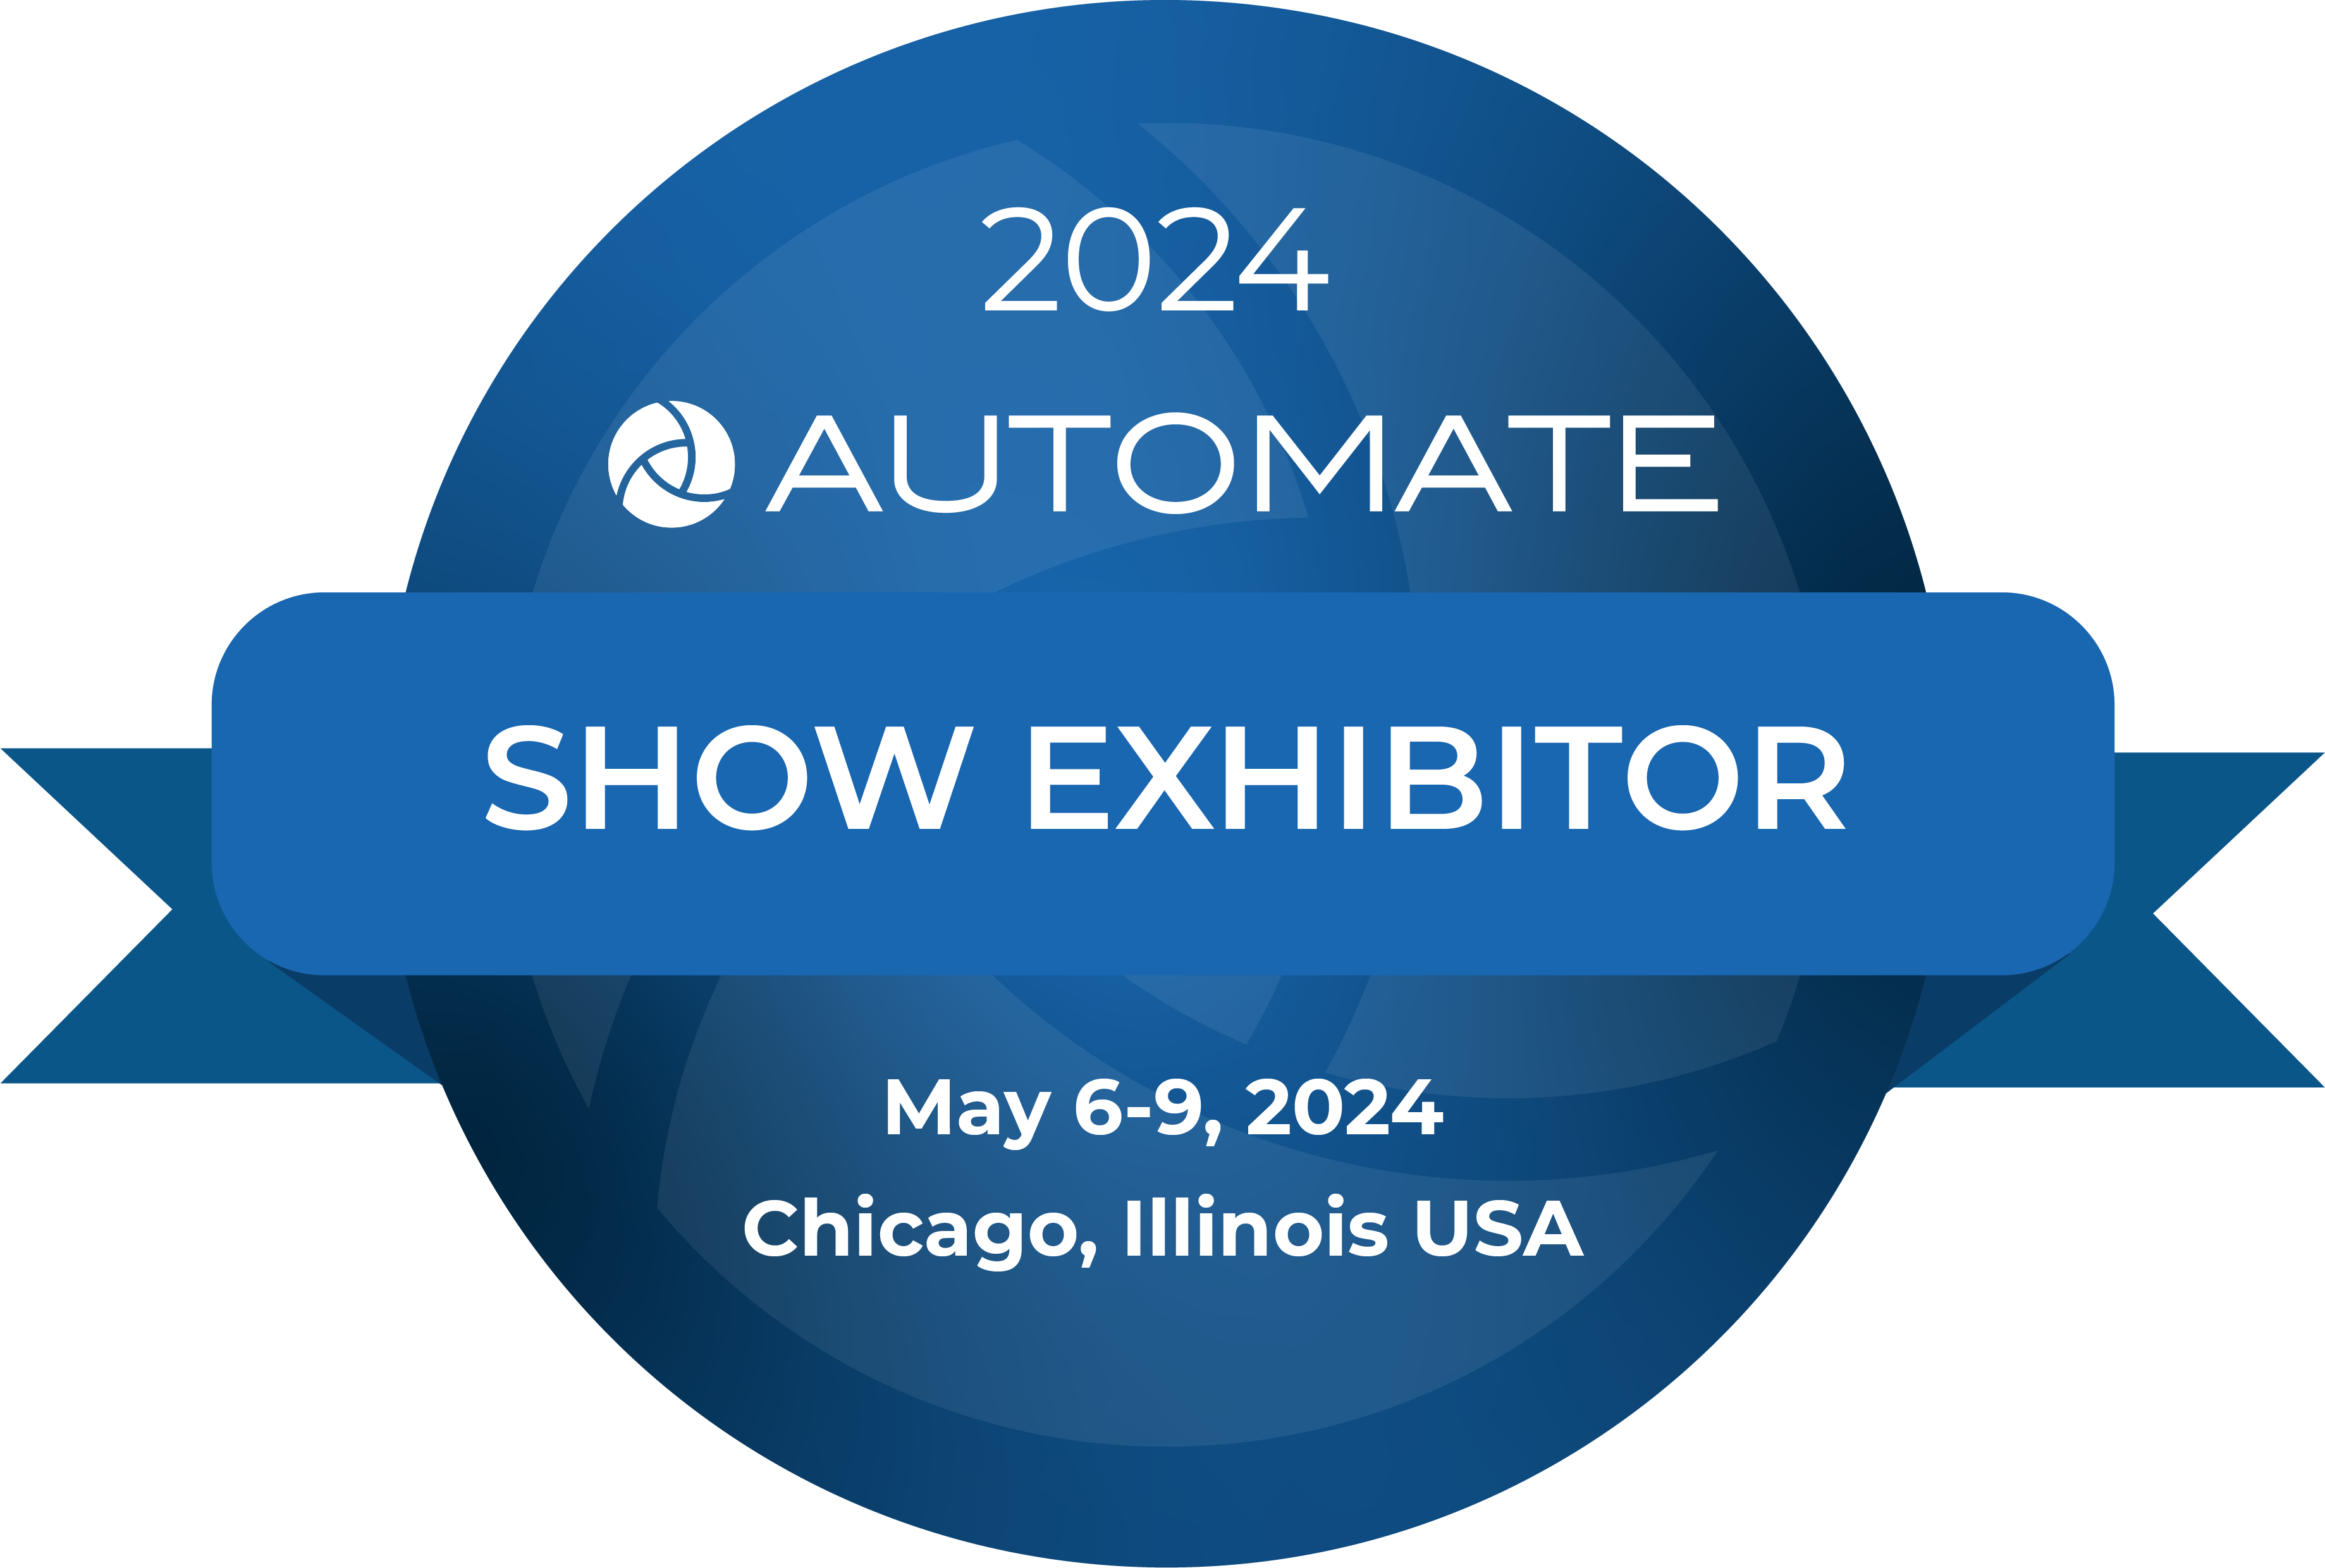 Exhibitor Resources for Automate 2024